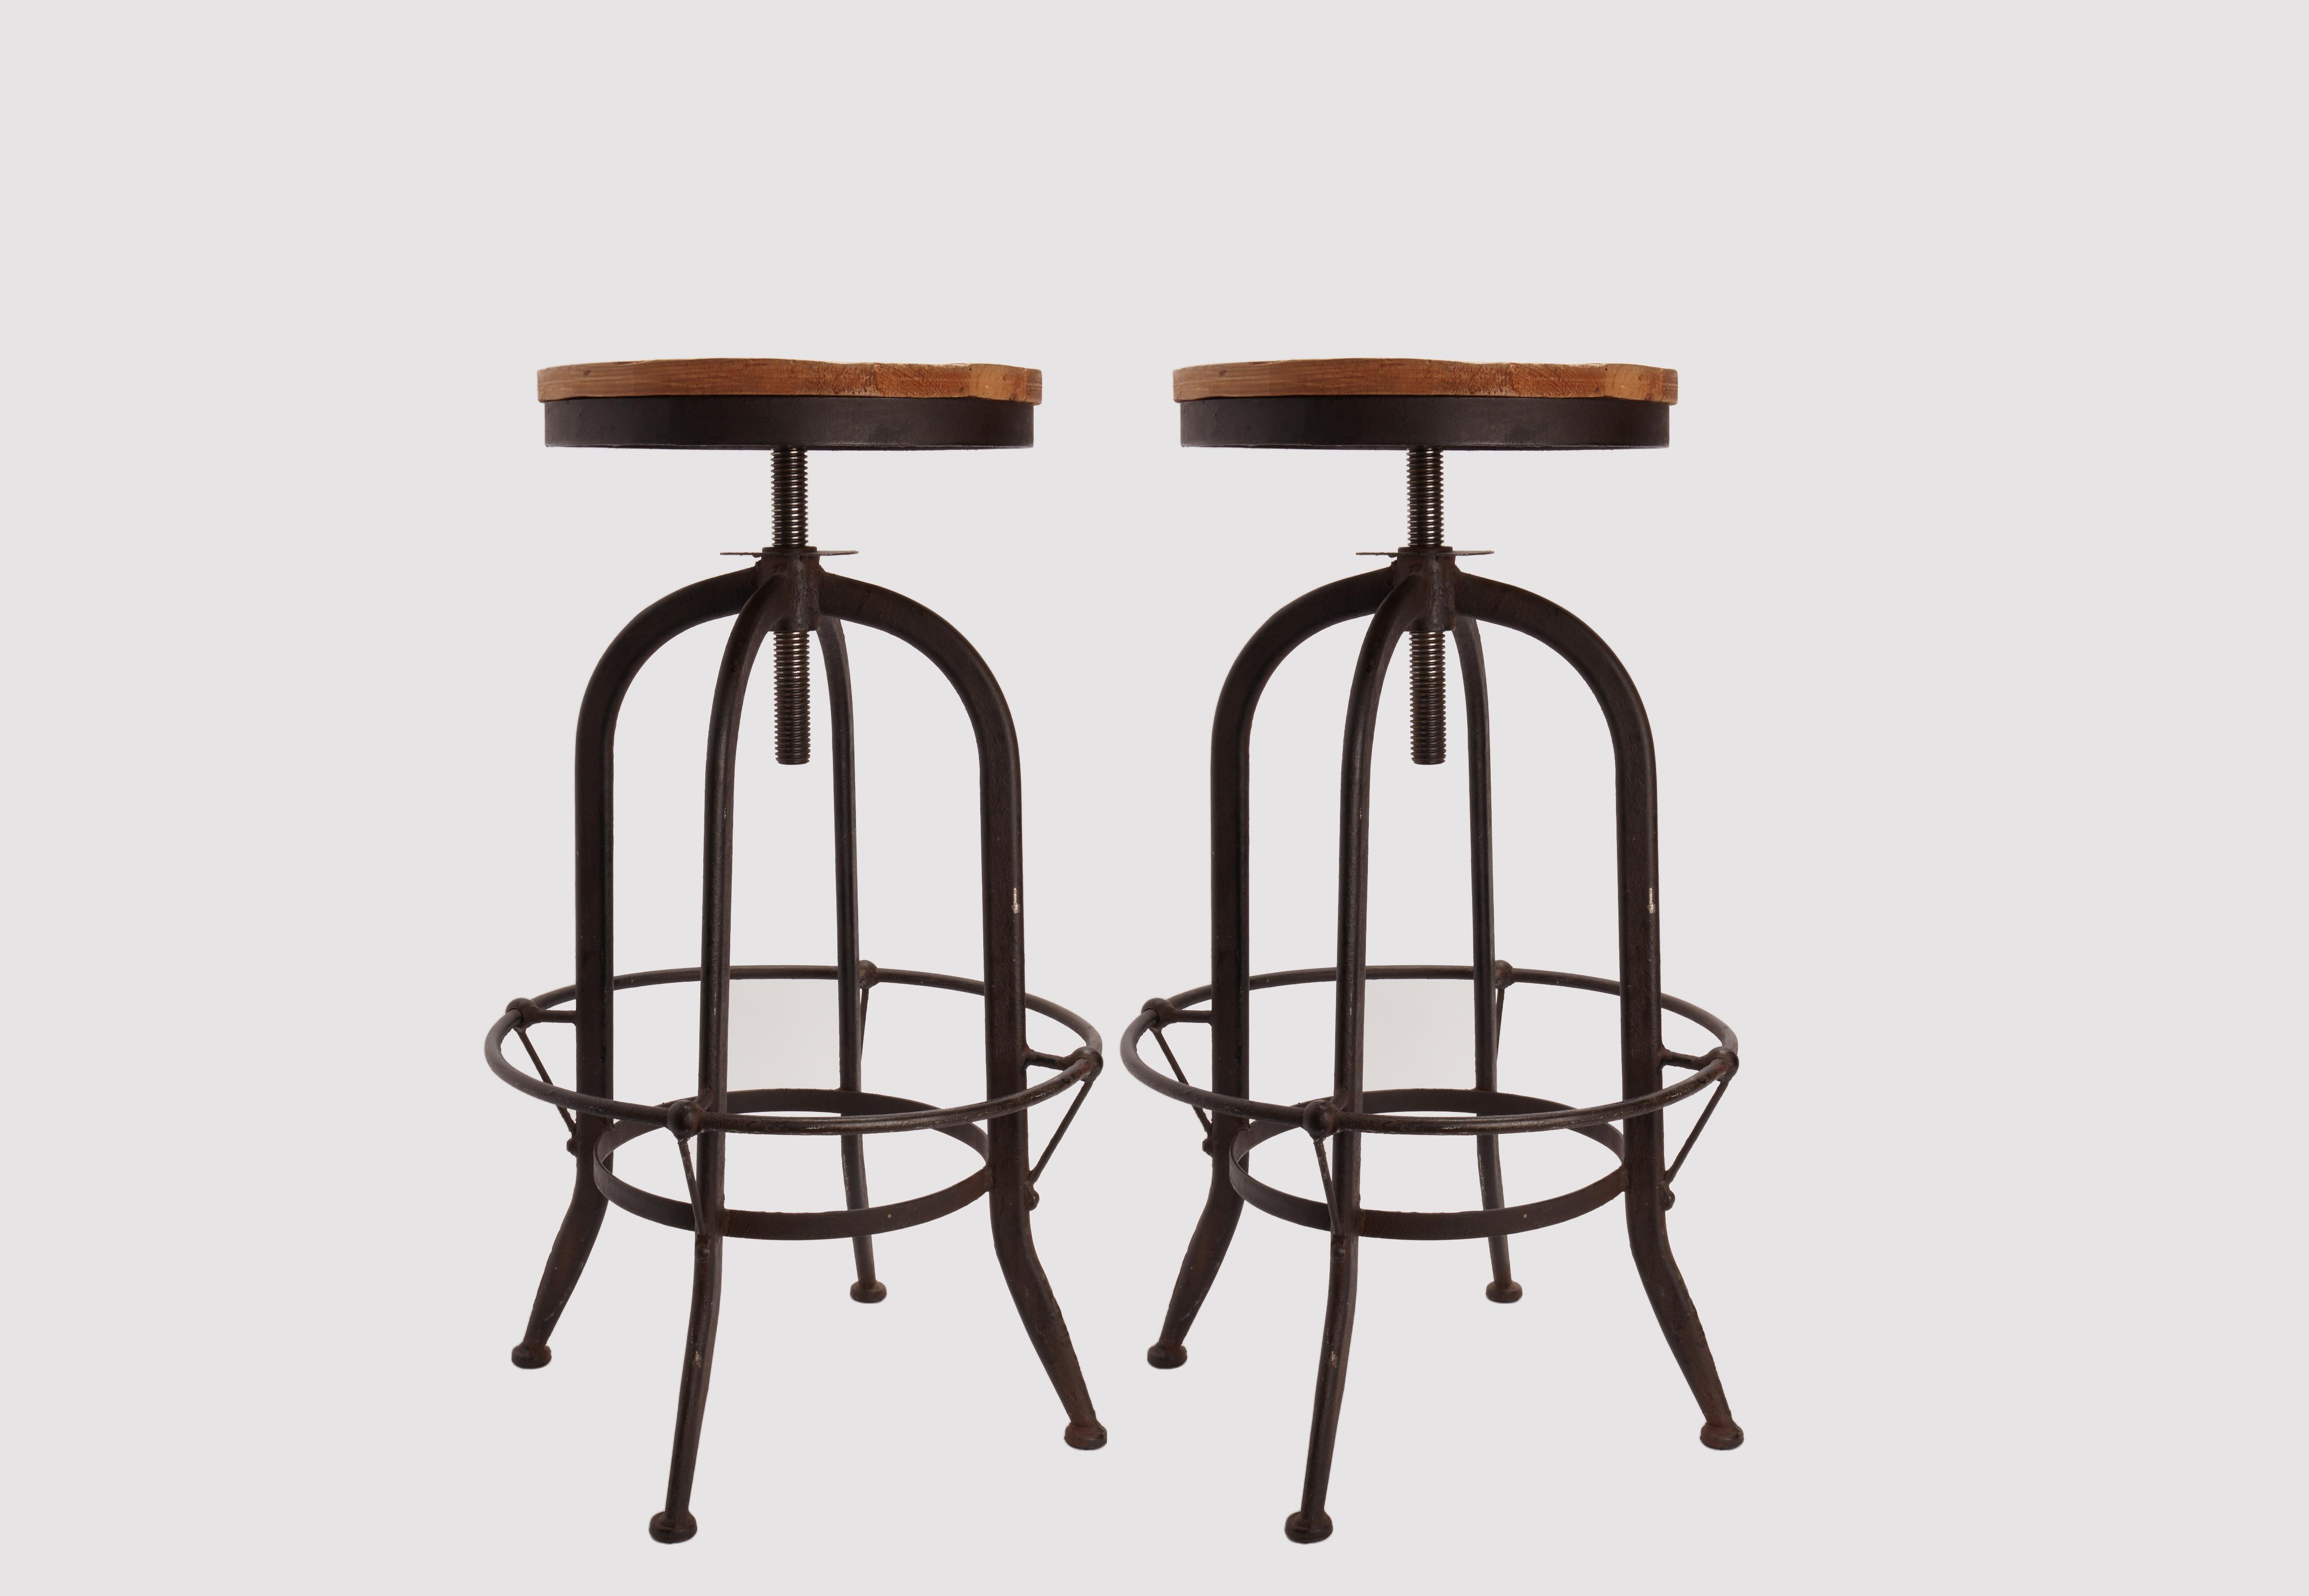 Pair of adjustable stools with footrest for the bistro industry. The 4 legs are made out of tubular iron, black color, and the site is made out of solid wood. Screwing or unscrewing the screw we can adjust the height of the stool.